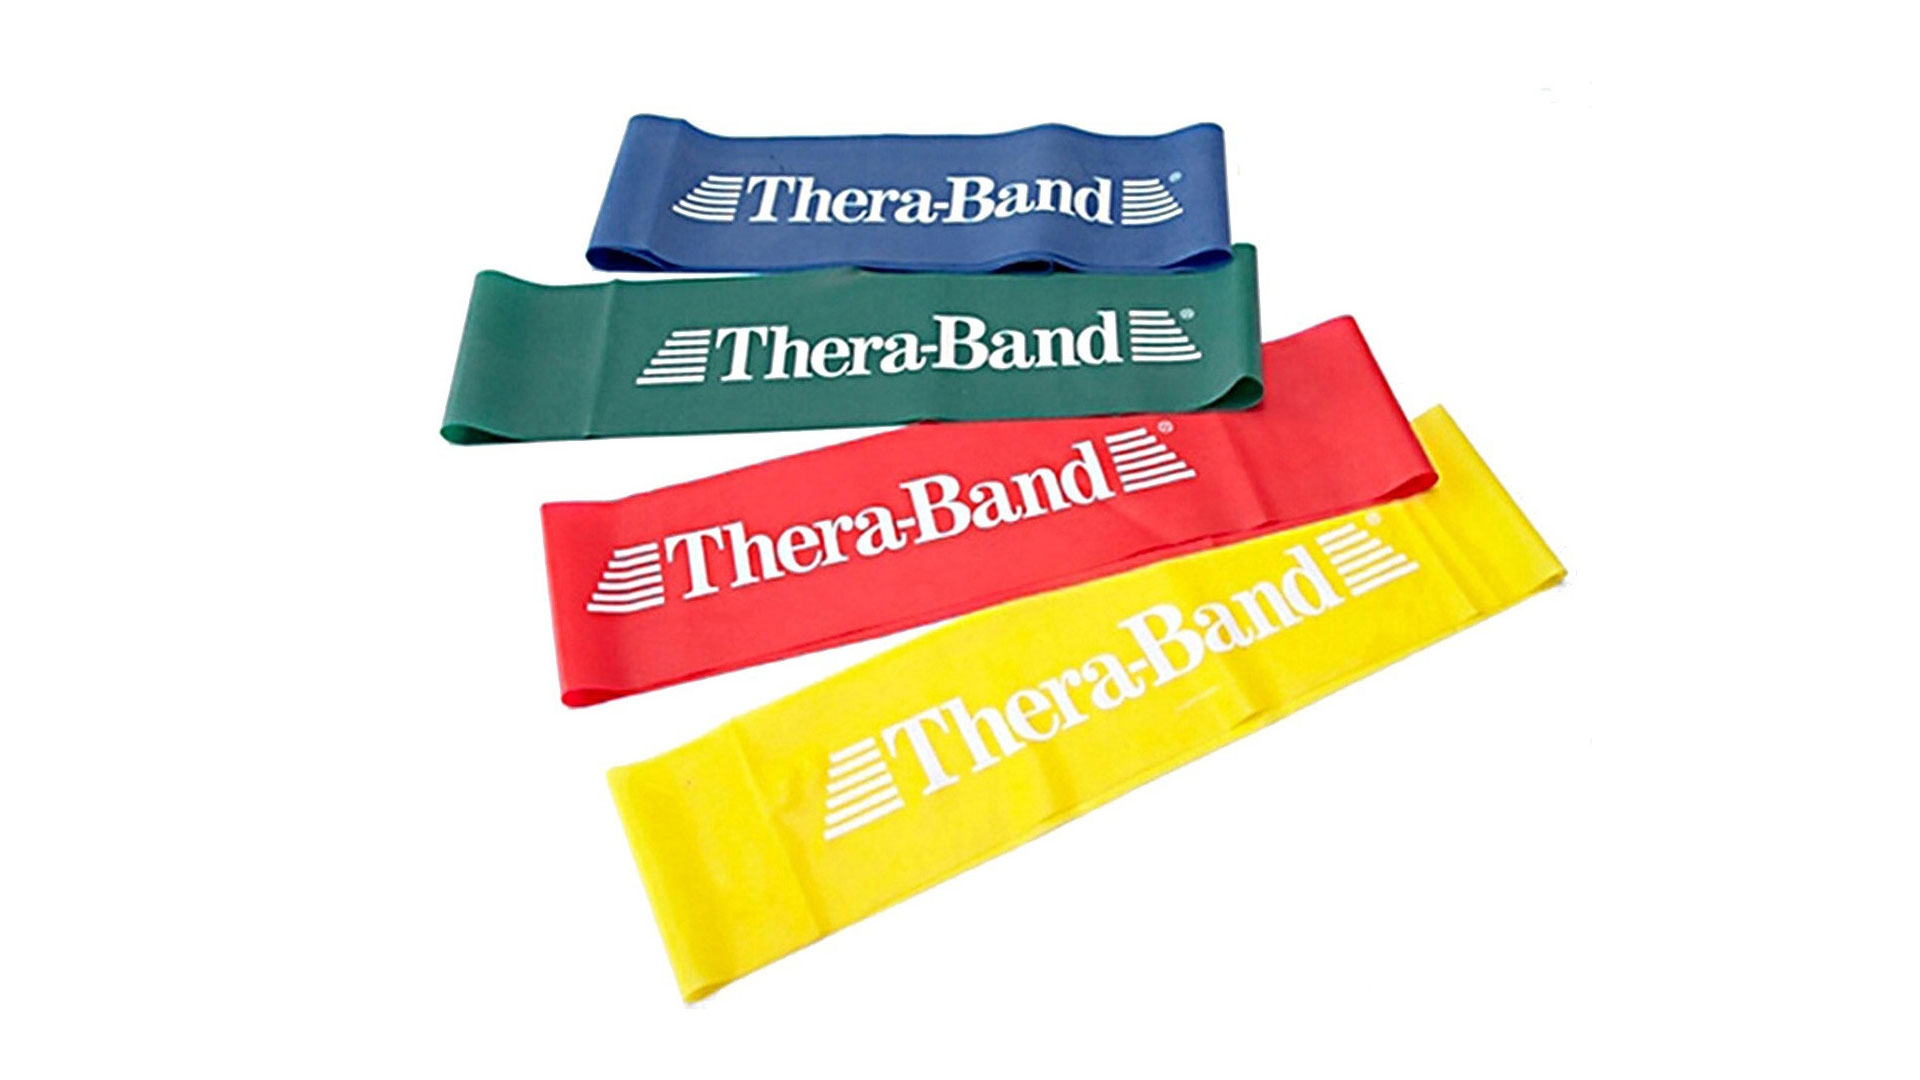 Best resistance bands: Theraband resistance bands